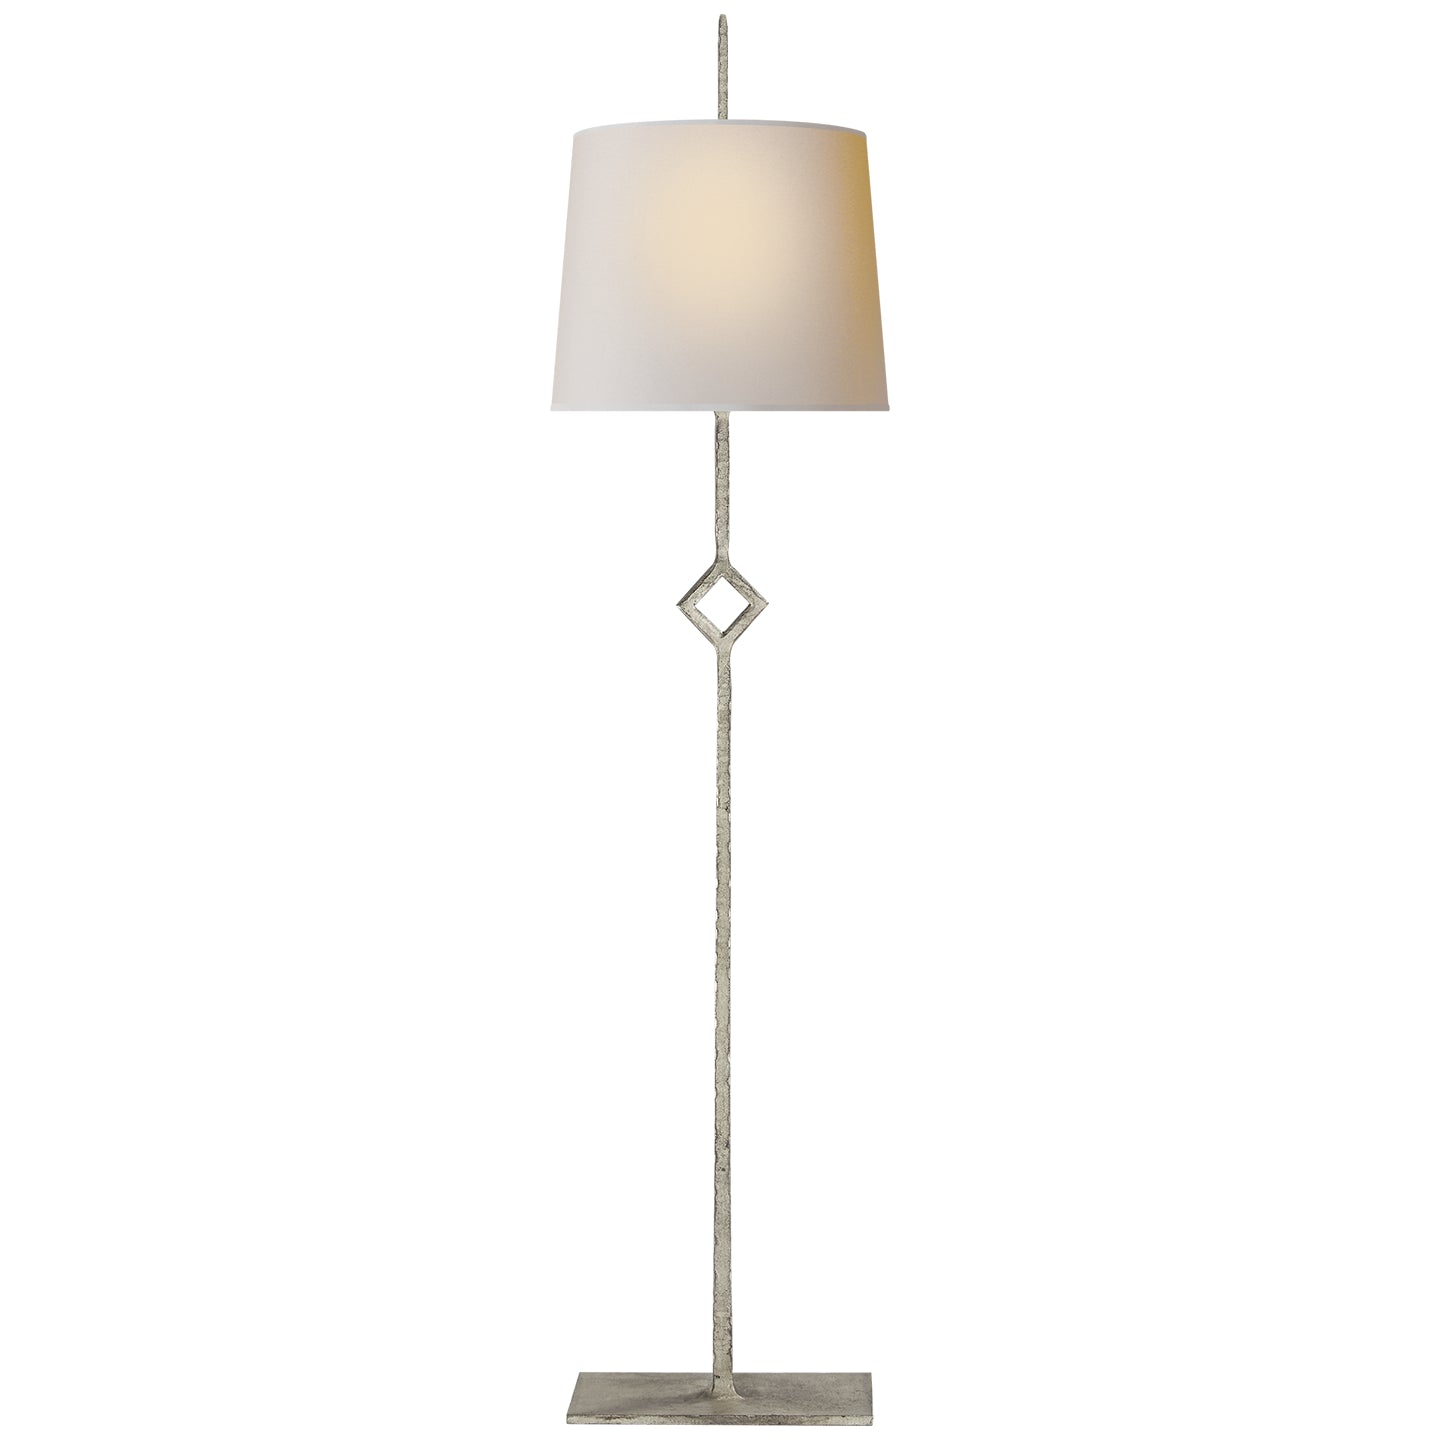 Load image into Gallery viewer, Visual Comfort Signature - S 3407BSL-NP - One Light Table Lamp - Cranston - Burnished Silver Leaf
